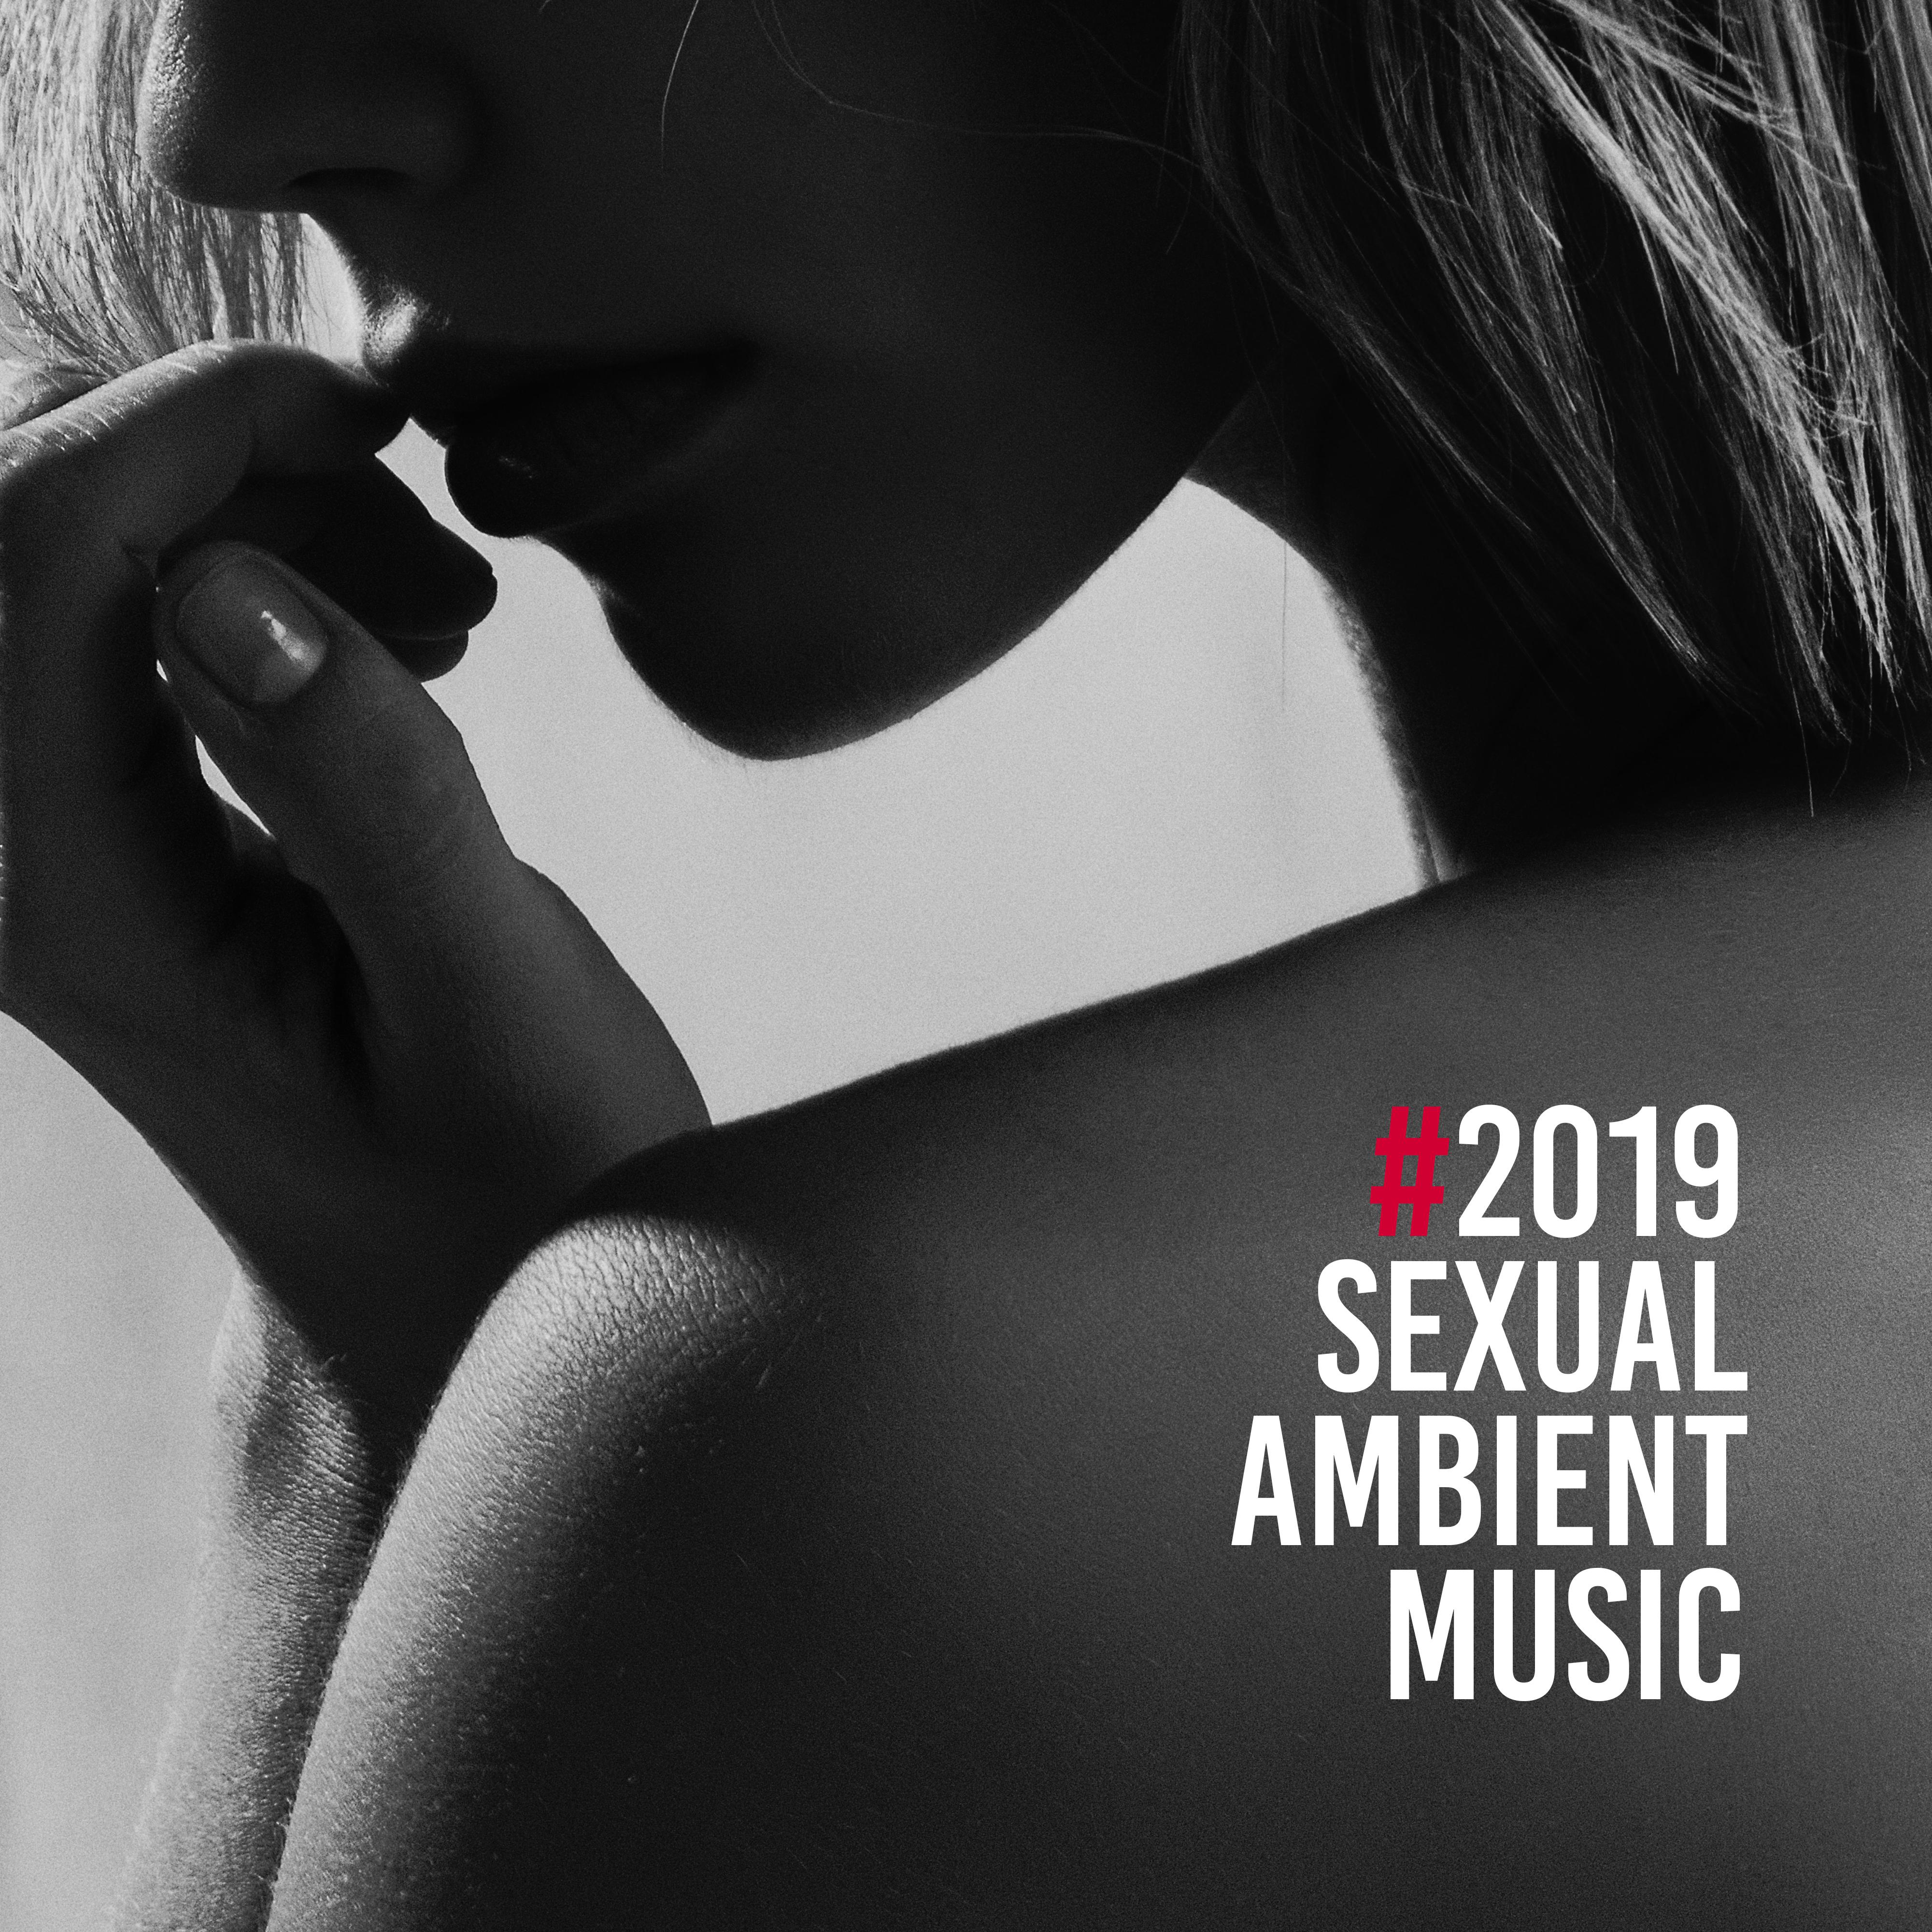 #2019 ****** Ambient Music - for Tantric Love, ****** Ecstasy and Erotic Bliss